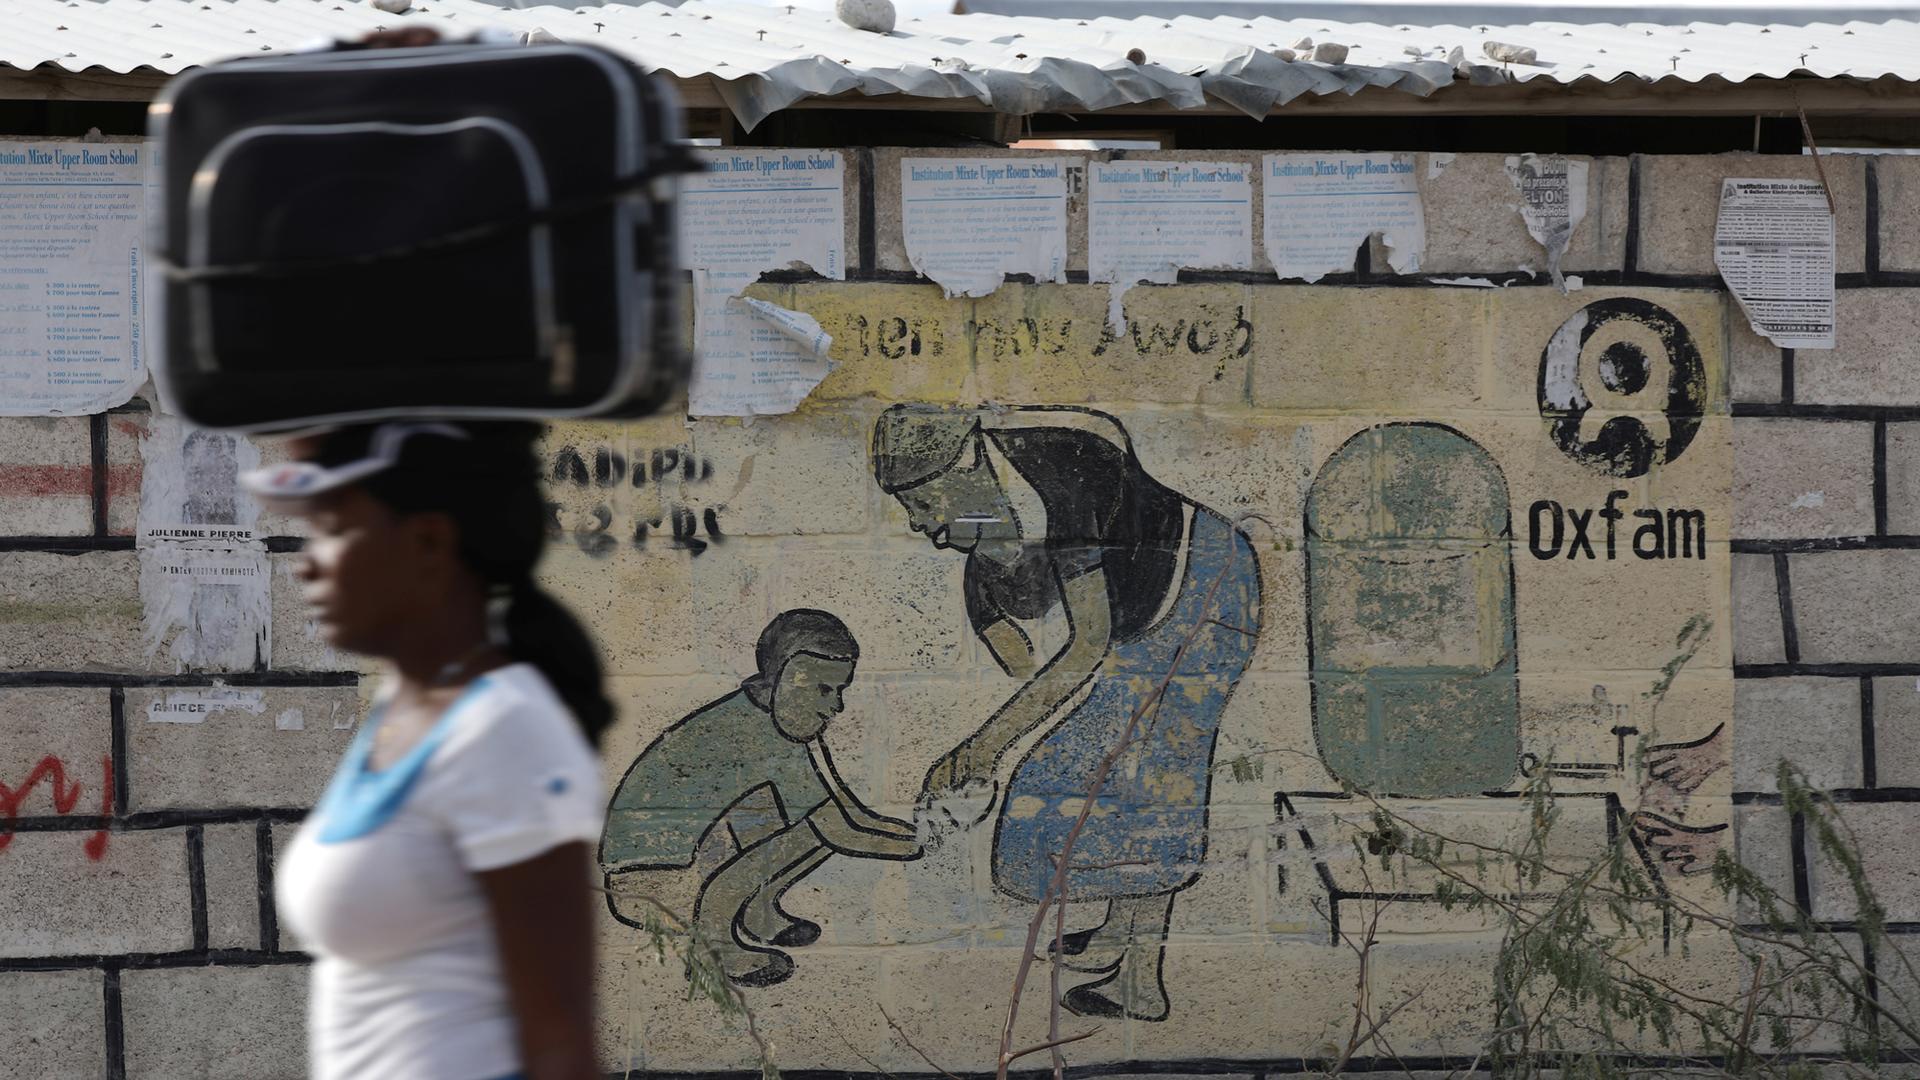 A woman walks carrying a suitcase on her head next to an Oxfam sign in Corail, a camp for displaced people of the 2010 earthquake, on the outskirts of Port-au-Prince, Haiti, Feb. 13, 2018.